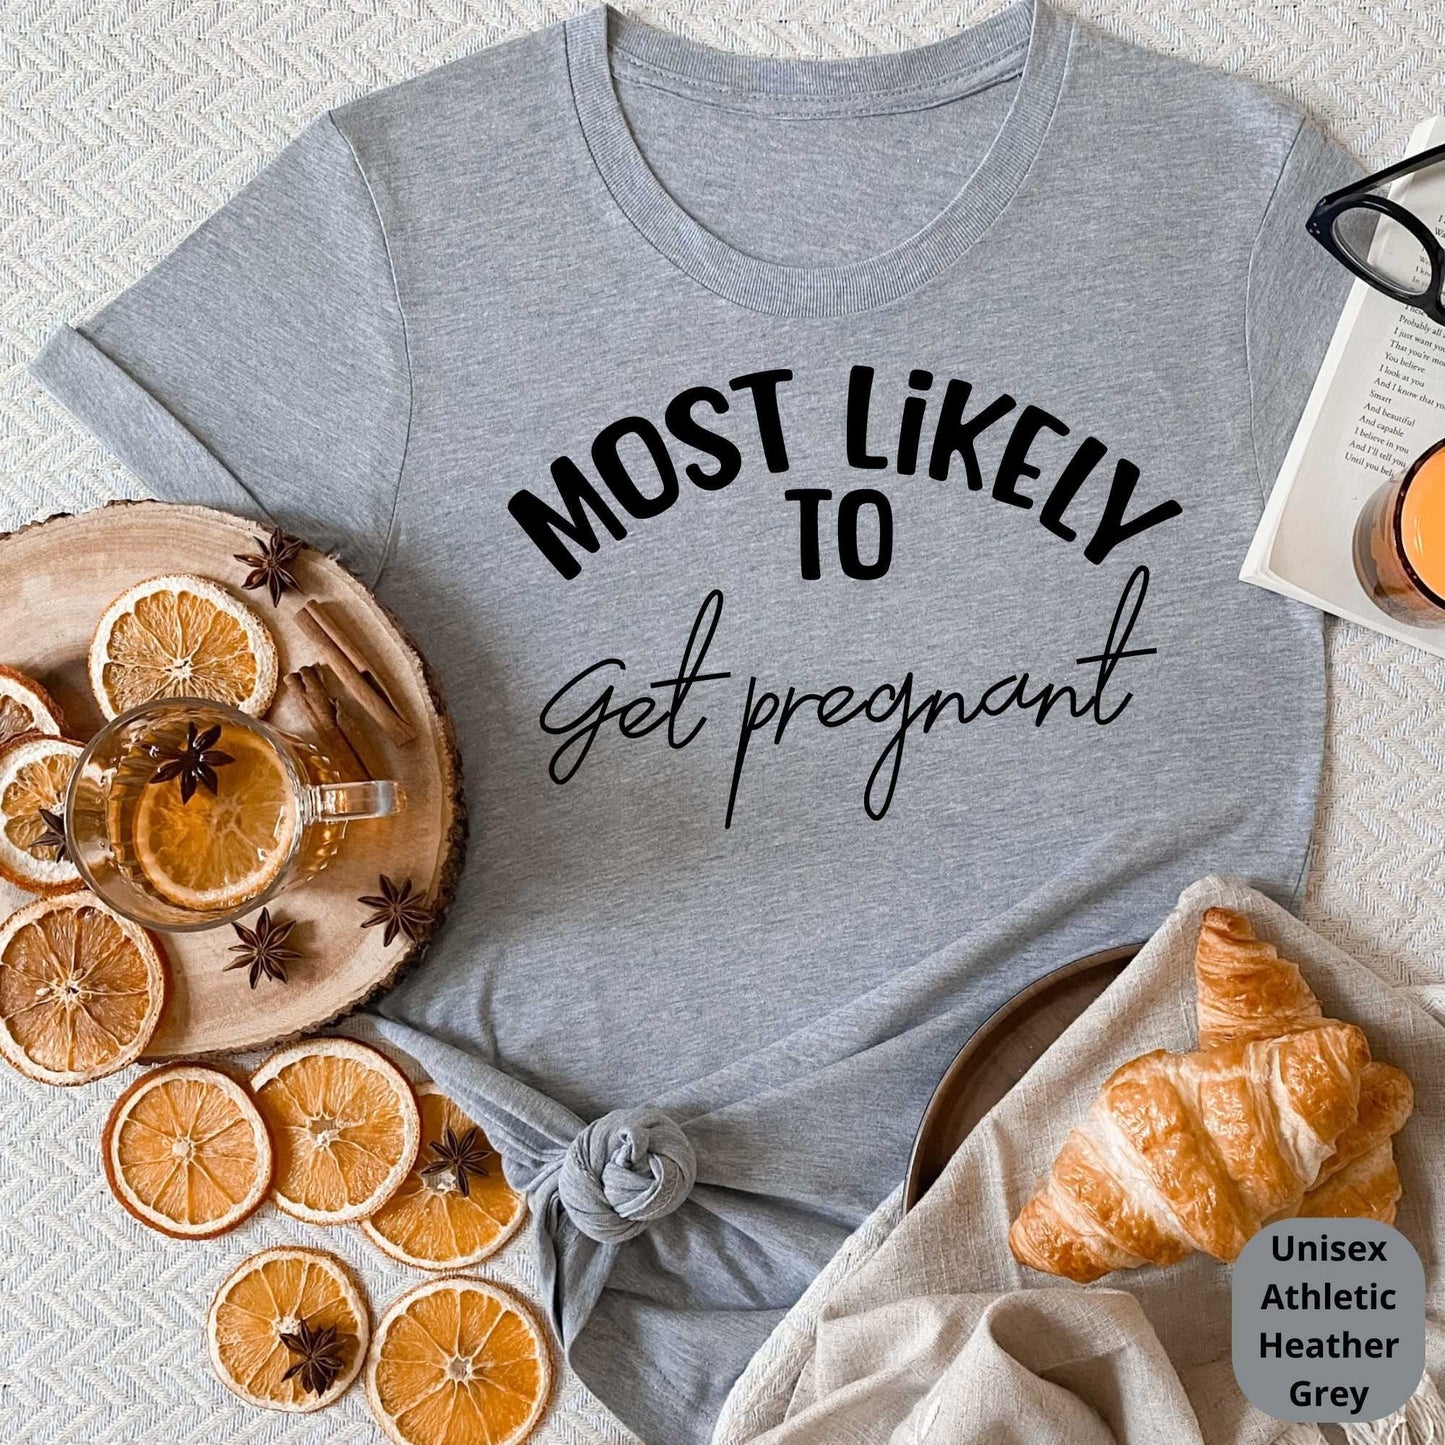 Most Likely To Bachelorette Party Shirts, Bridesmaids Gifts